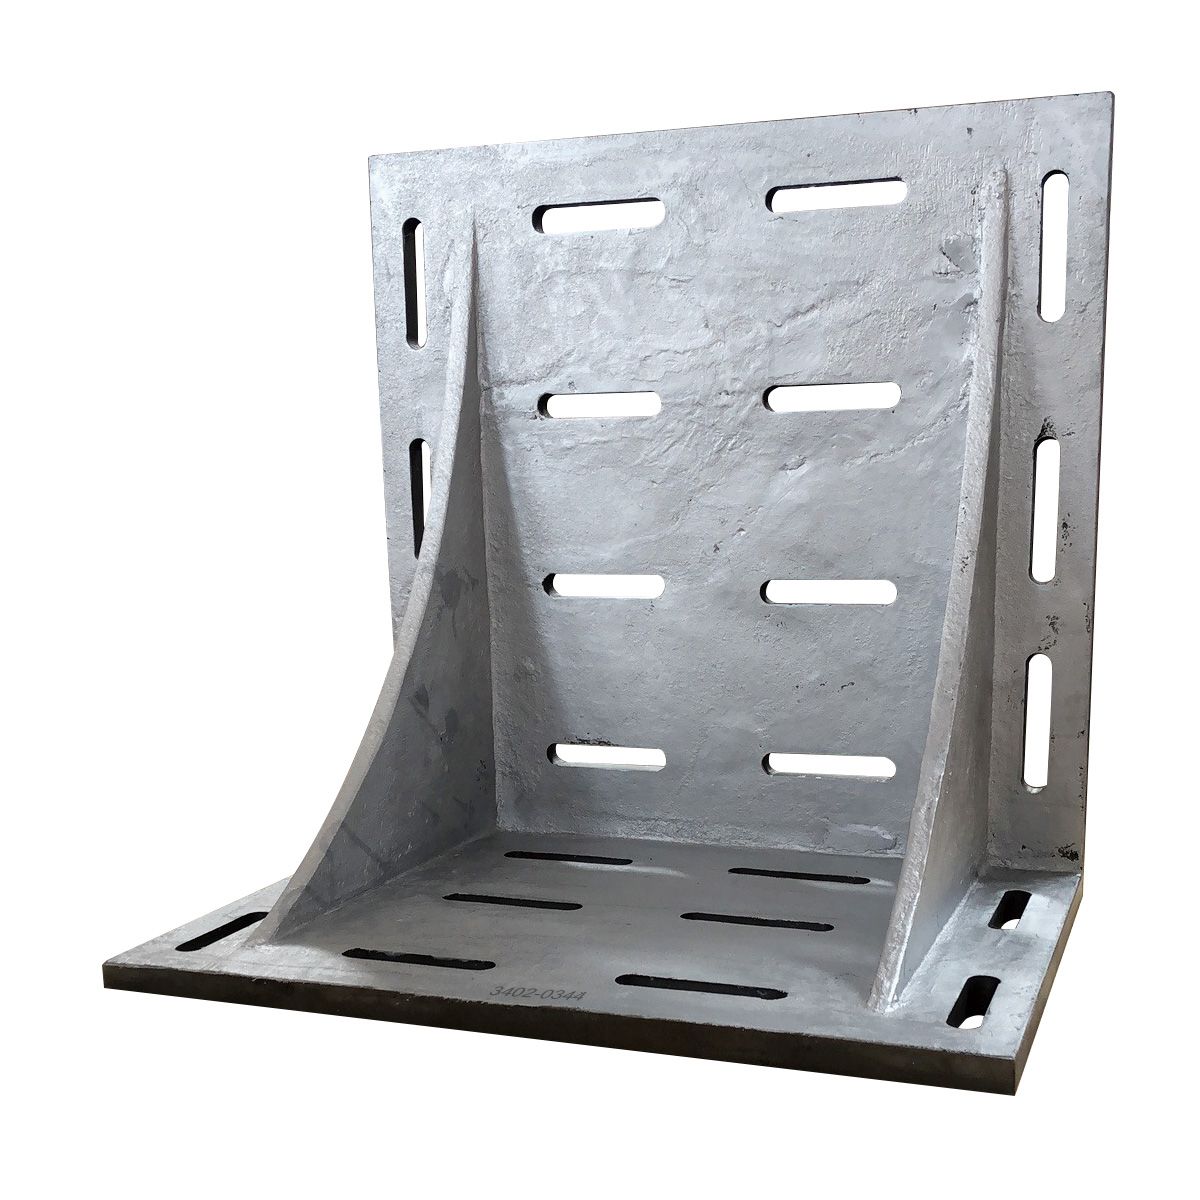 24 X 24 X 18" GIANT SLOTTED ANGLE PLATE (3402-0344)